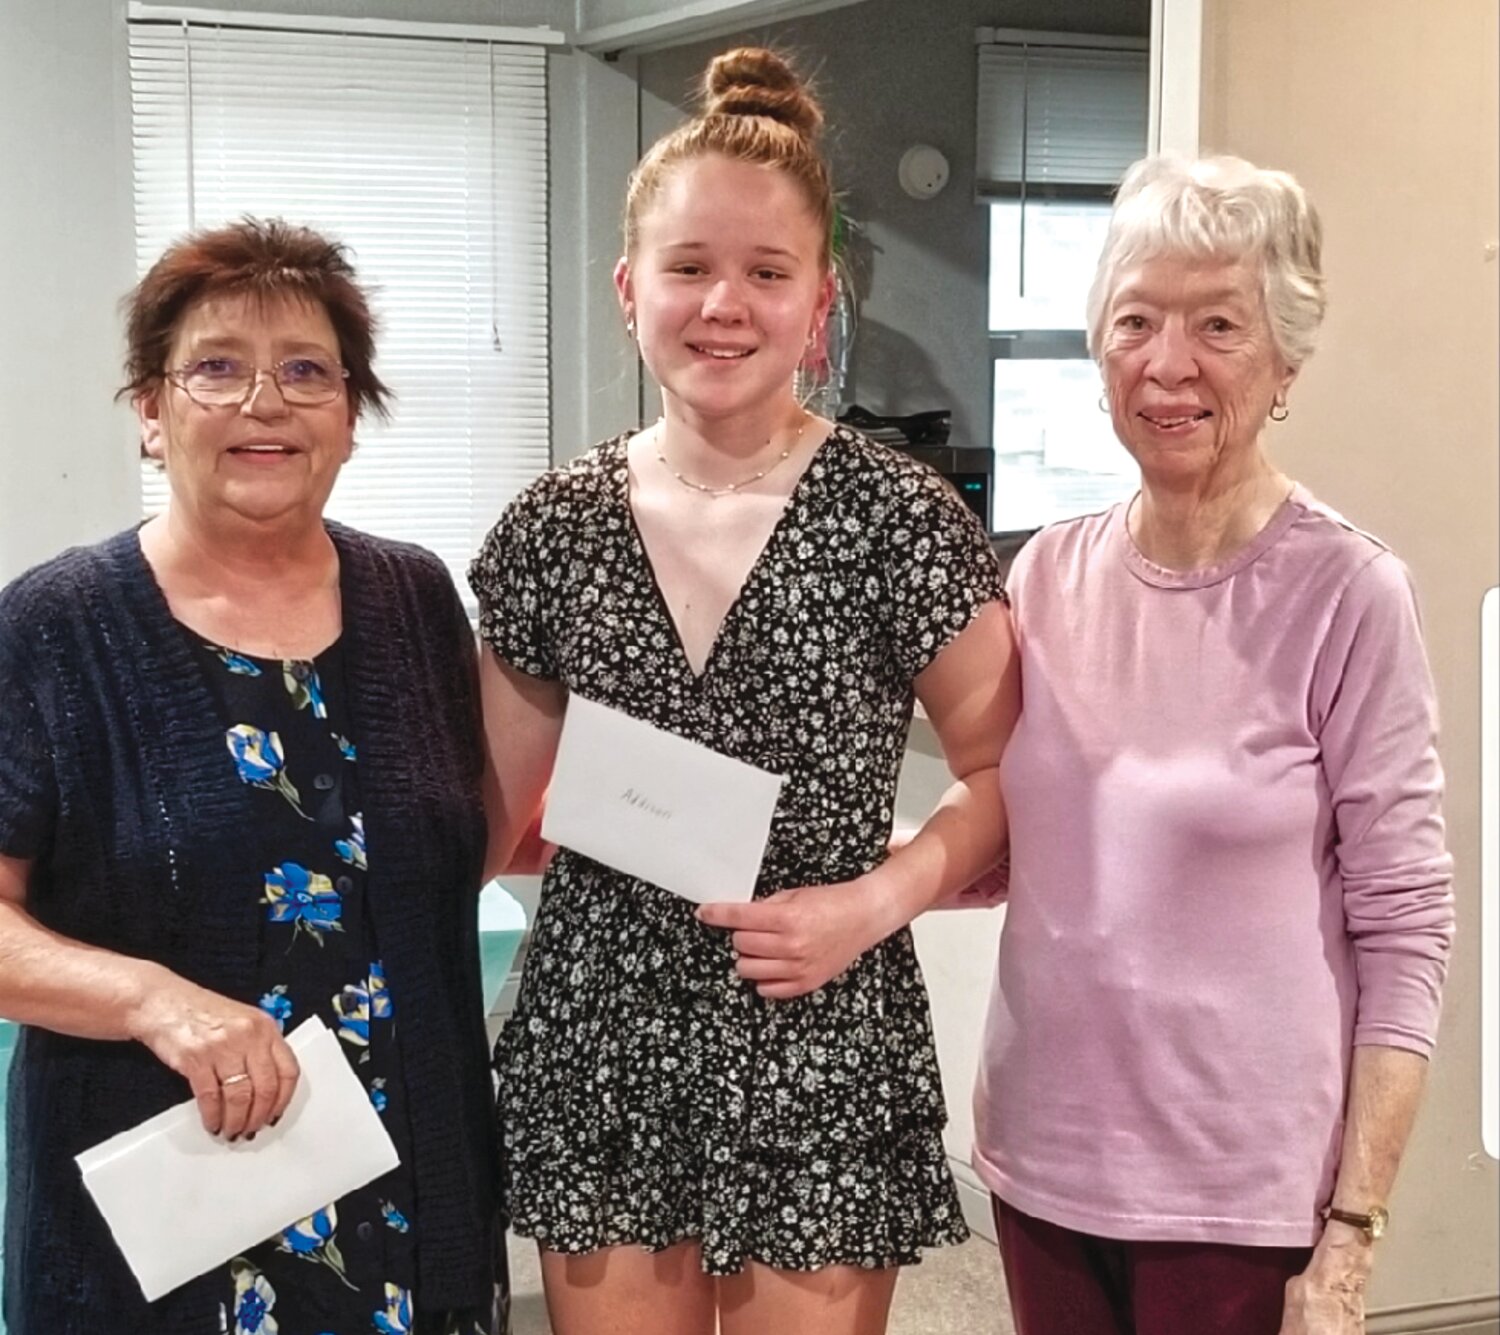 Golden Study Club members Ronda Gerlt (left) and Pansy Kean (right) present a $600 scholarship to recent FHS graduate Addison Newell (center).